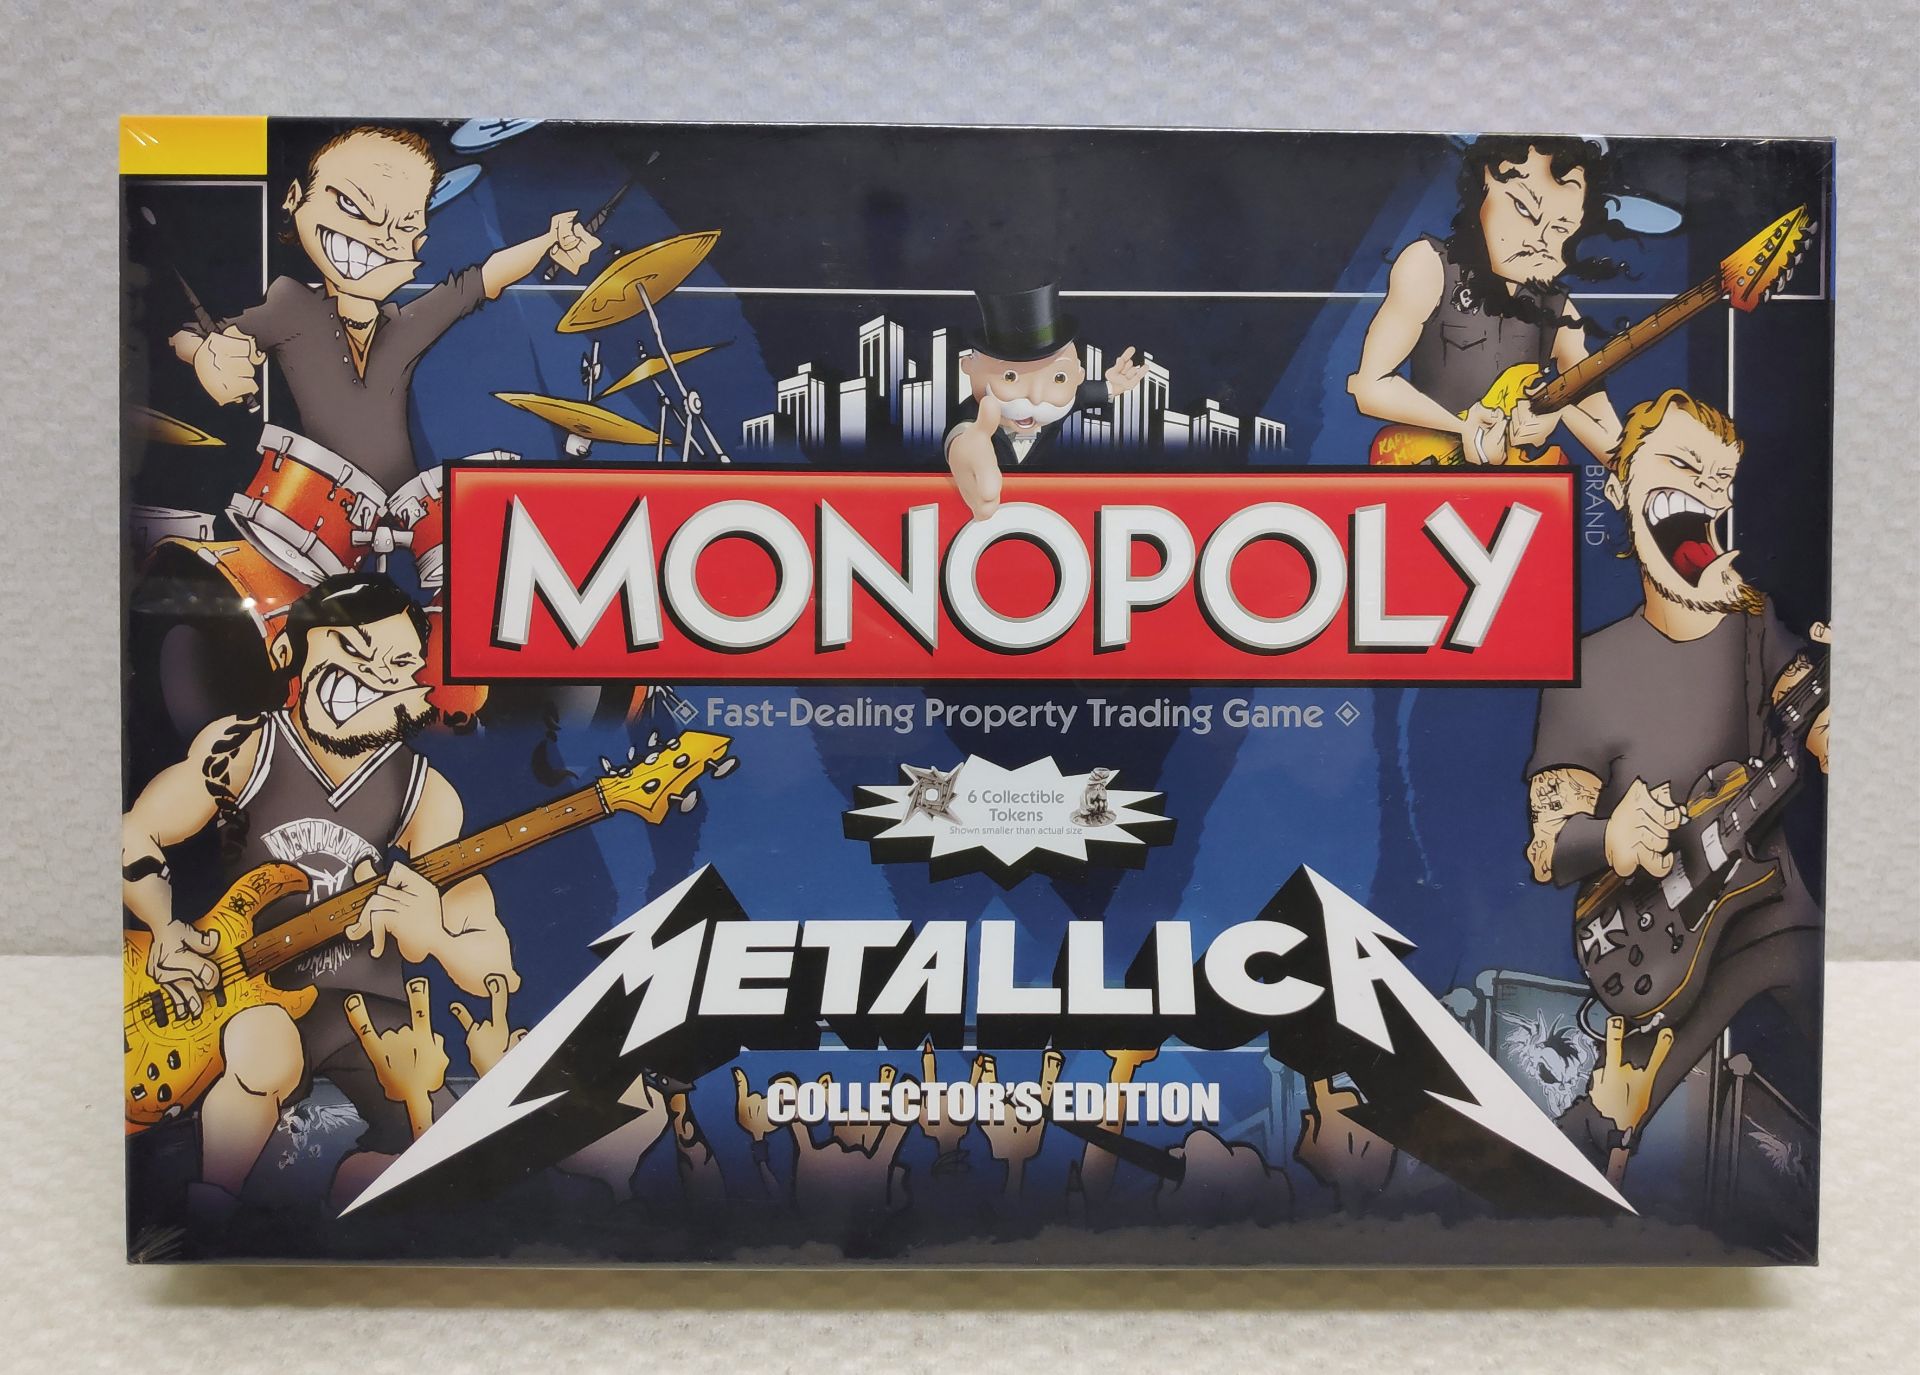 1 x Metallica Collector's Edition Monopoly - New/Sealed